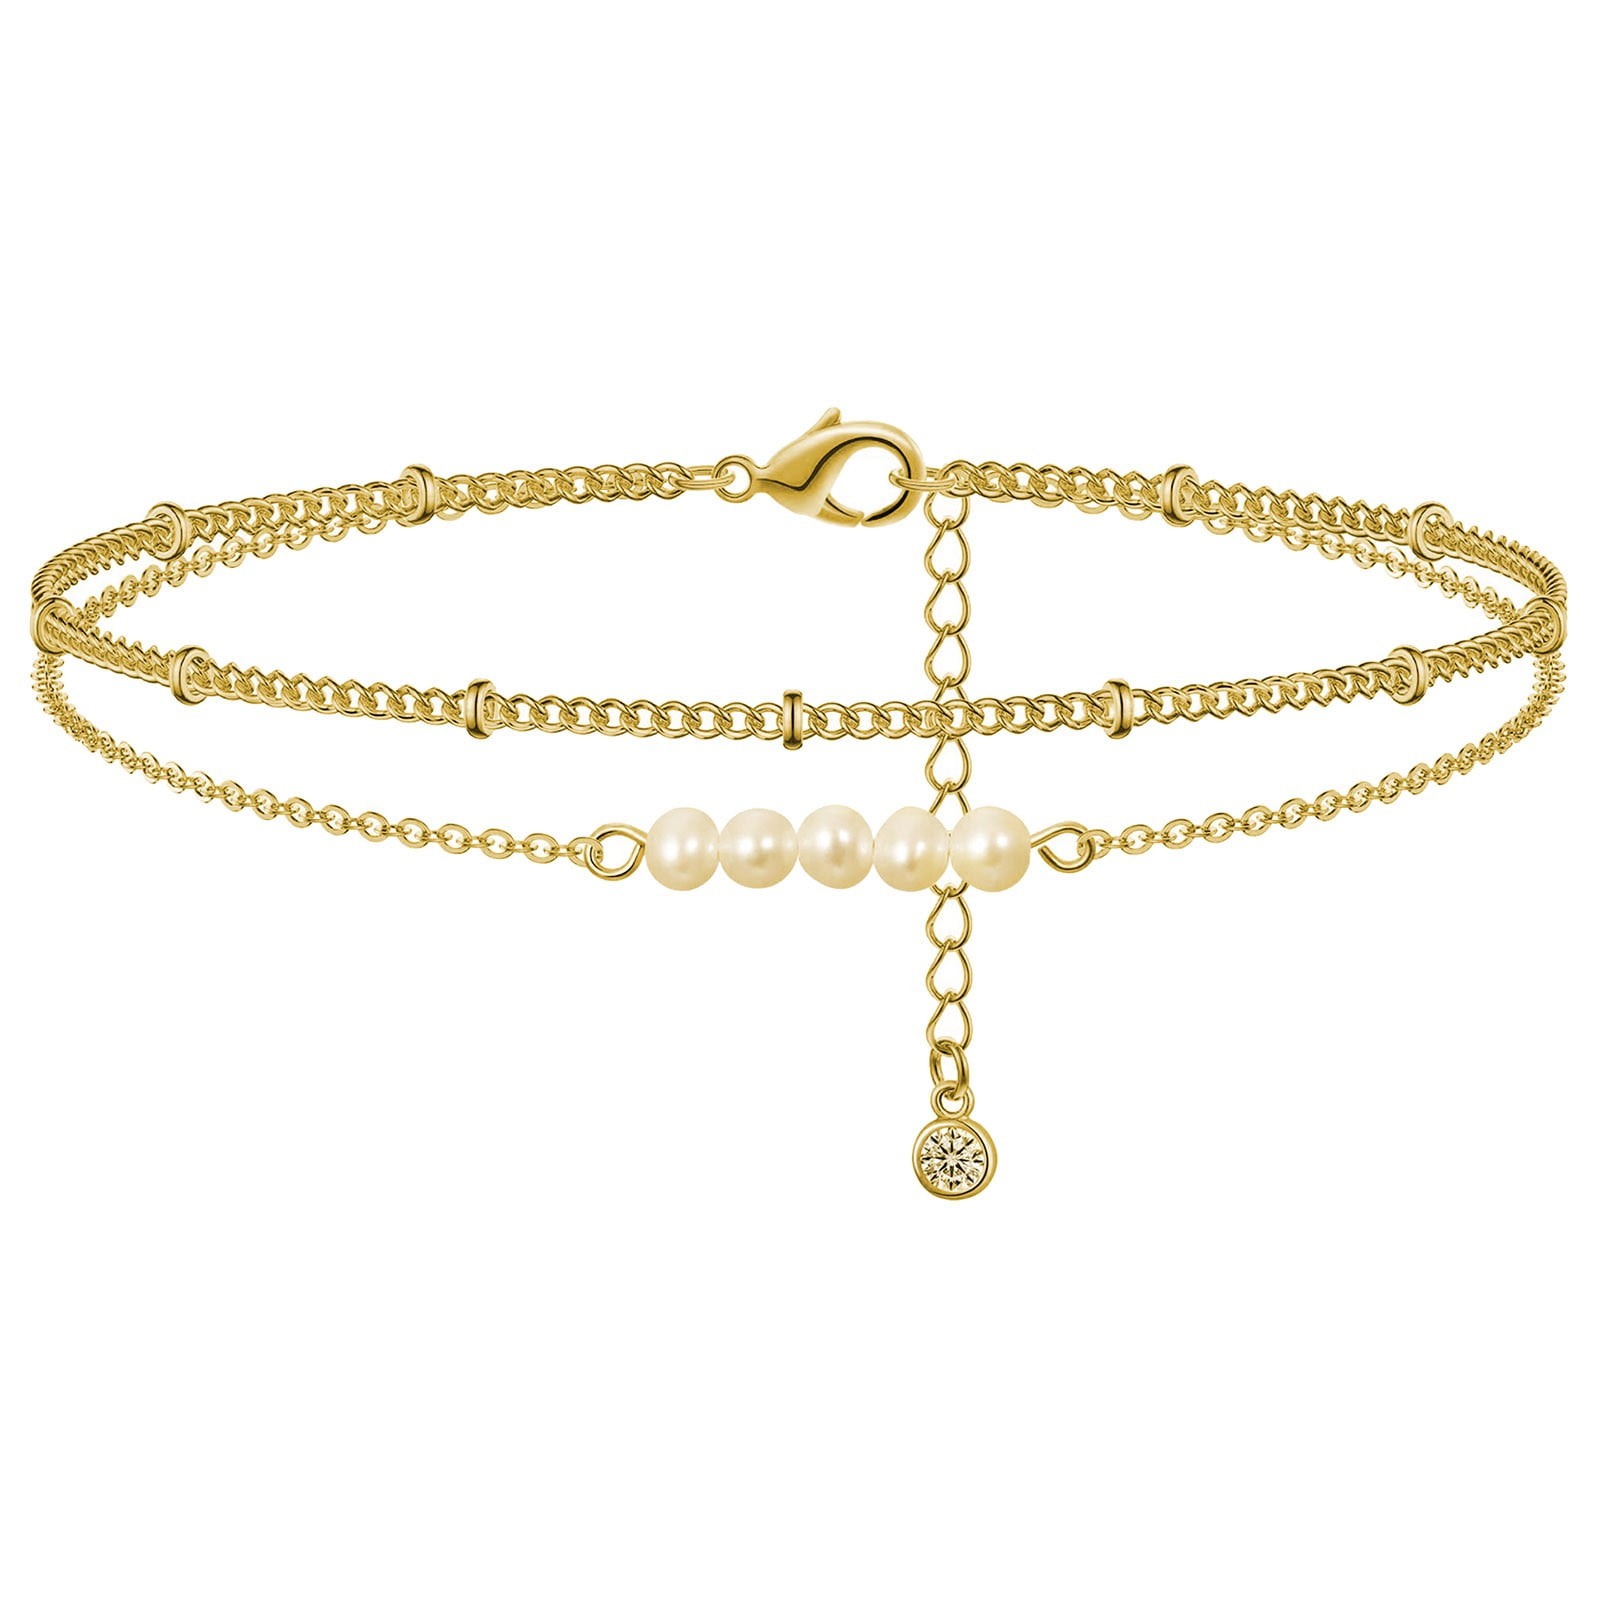  Gold Ankle Bracelet for Women Boho Layered Anklets Set Link  Anklet Trendy Stuff Under 5 Dollar Items Beaded Pearl Chain Dainty Foot  Jewelry for Summer Beach: Clothing, Shoes & Jewelry